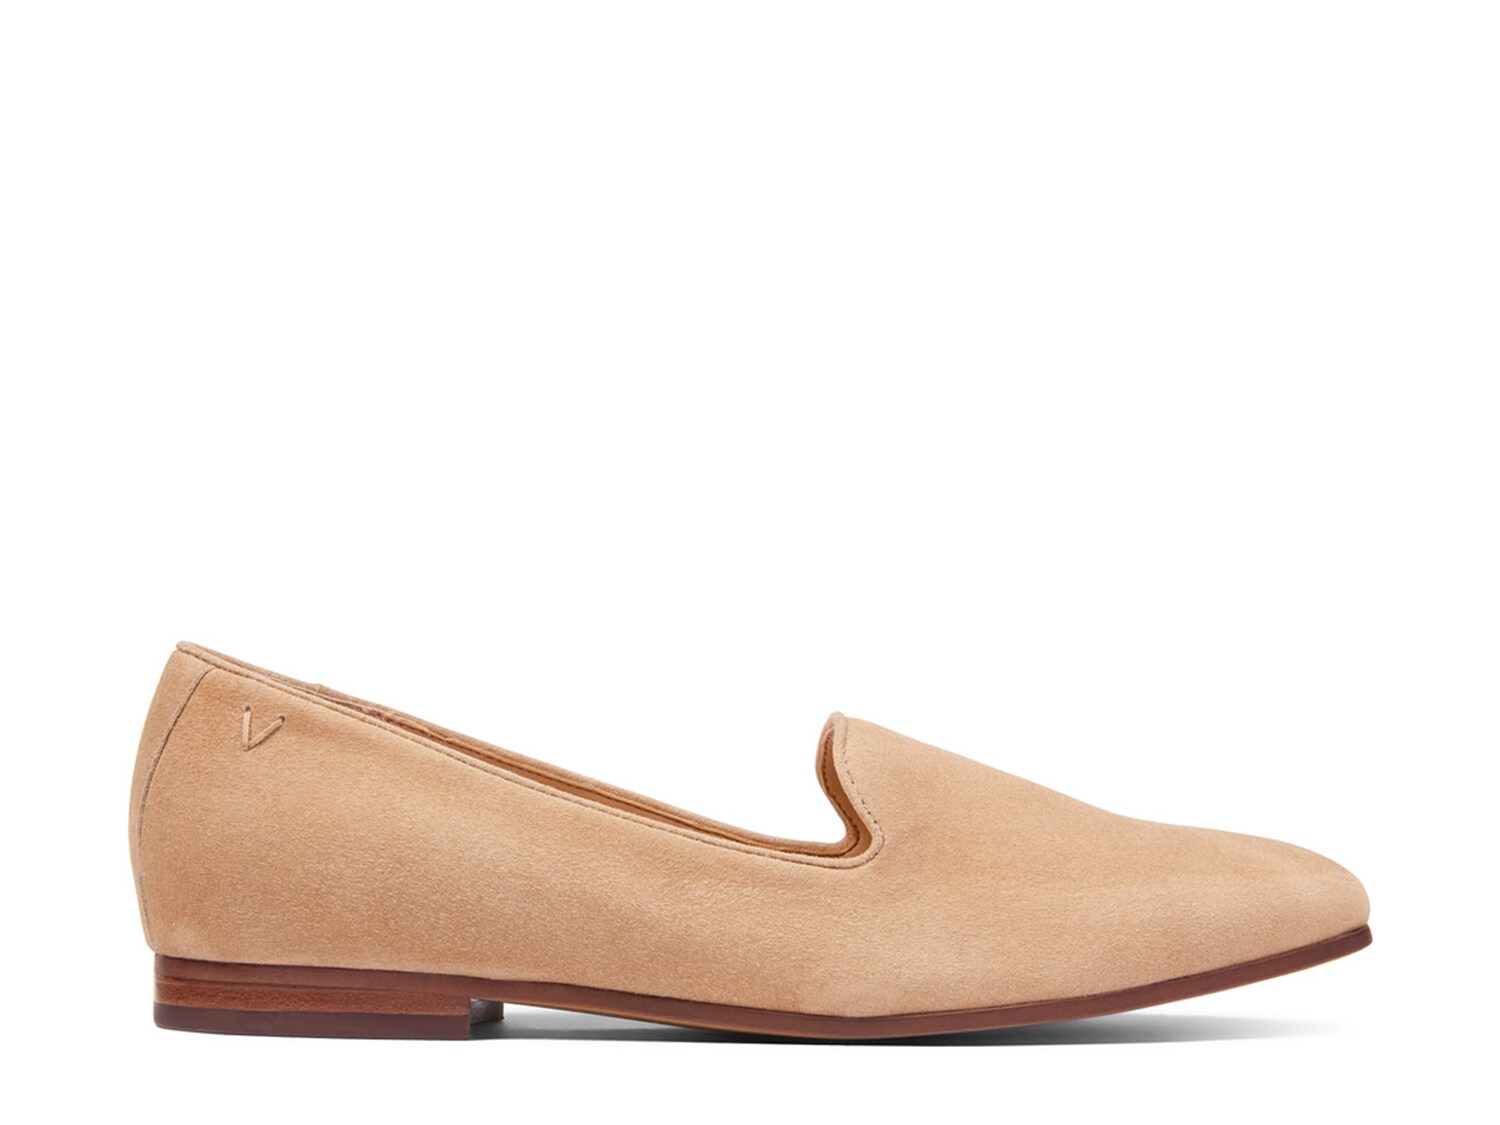 Vionic Willa Loafer Women's Shoes | DSW